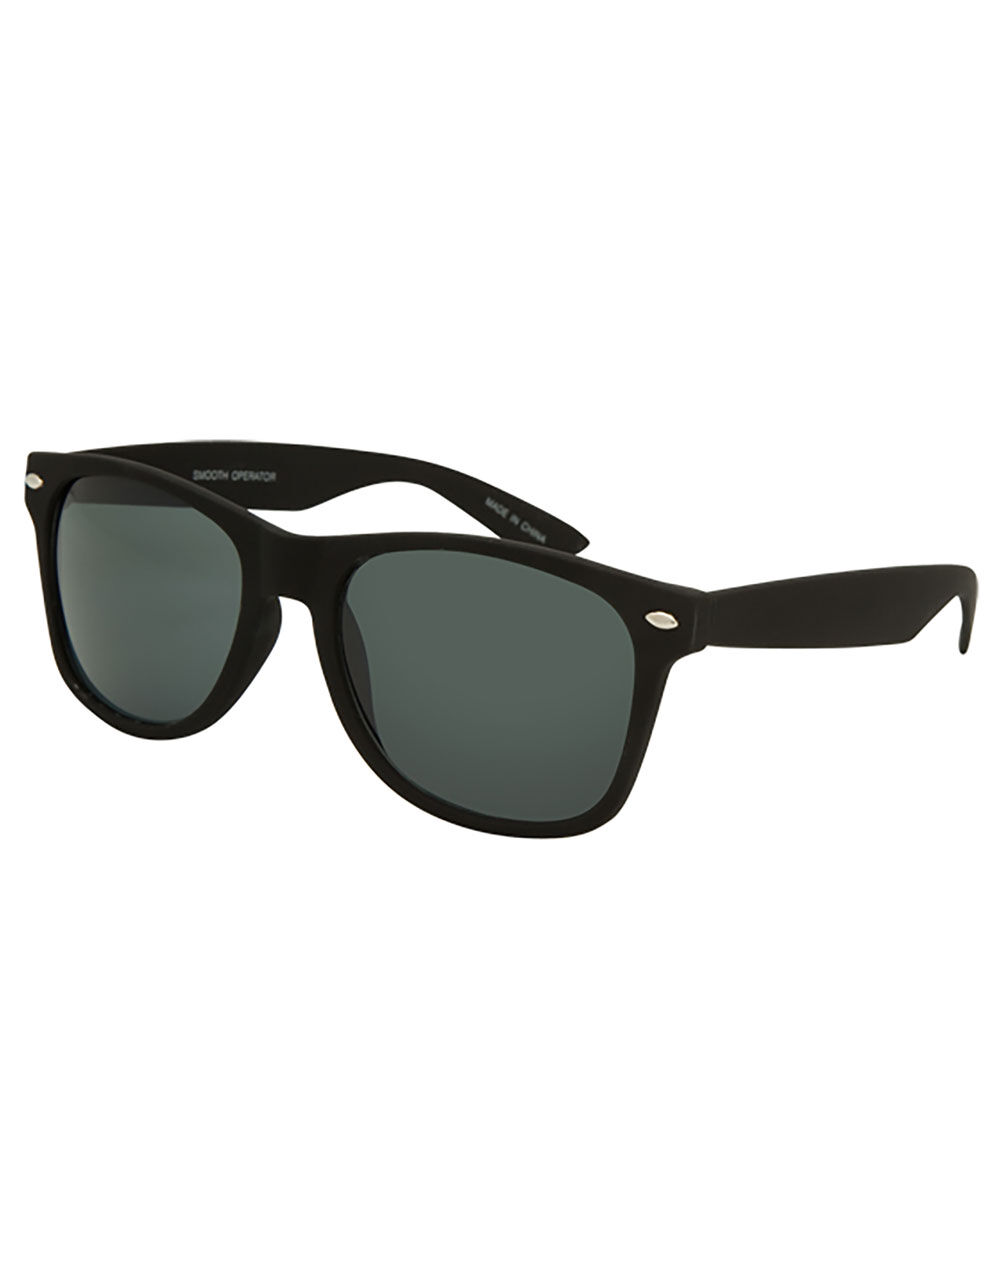 BLUE CROWN Smooth Operator Sunglasses image number 0